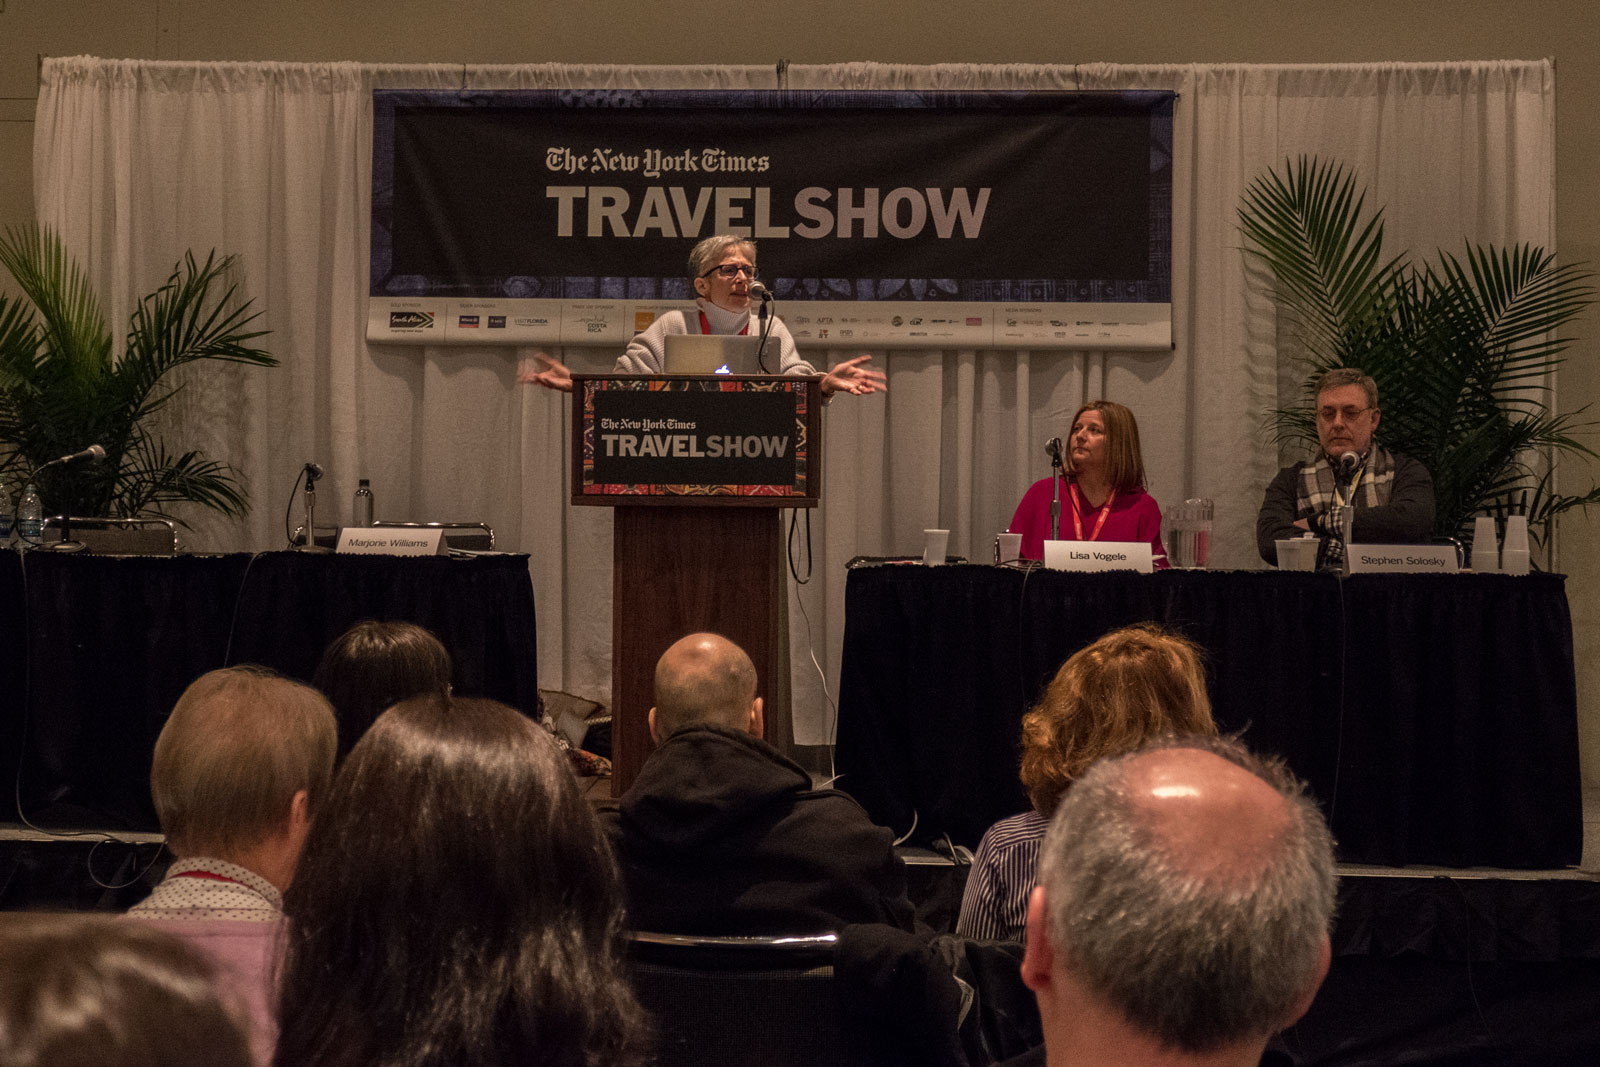 Marjorie R. Williams Festivals and Markets Seminar 2017 New York Times Travel Show